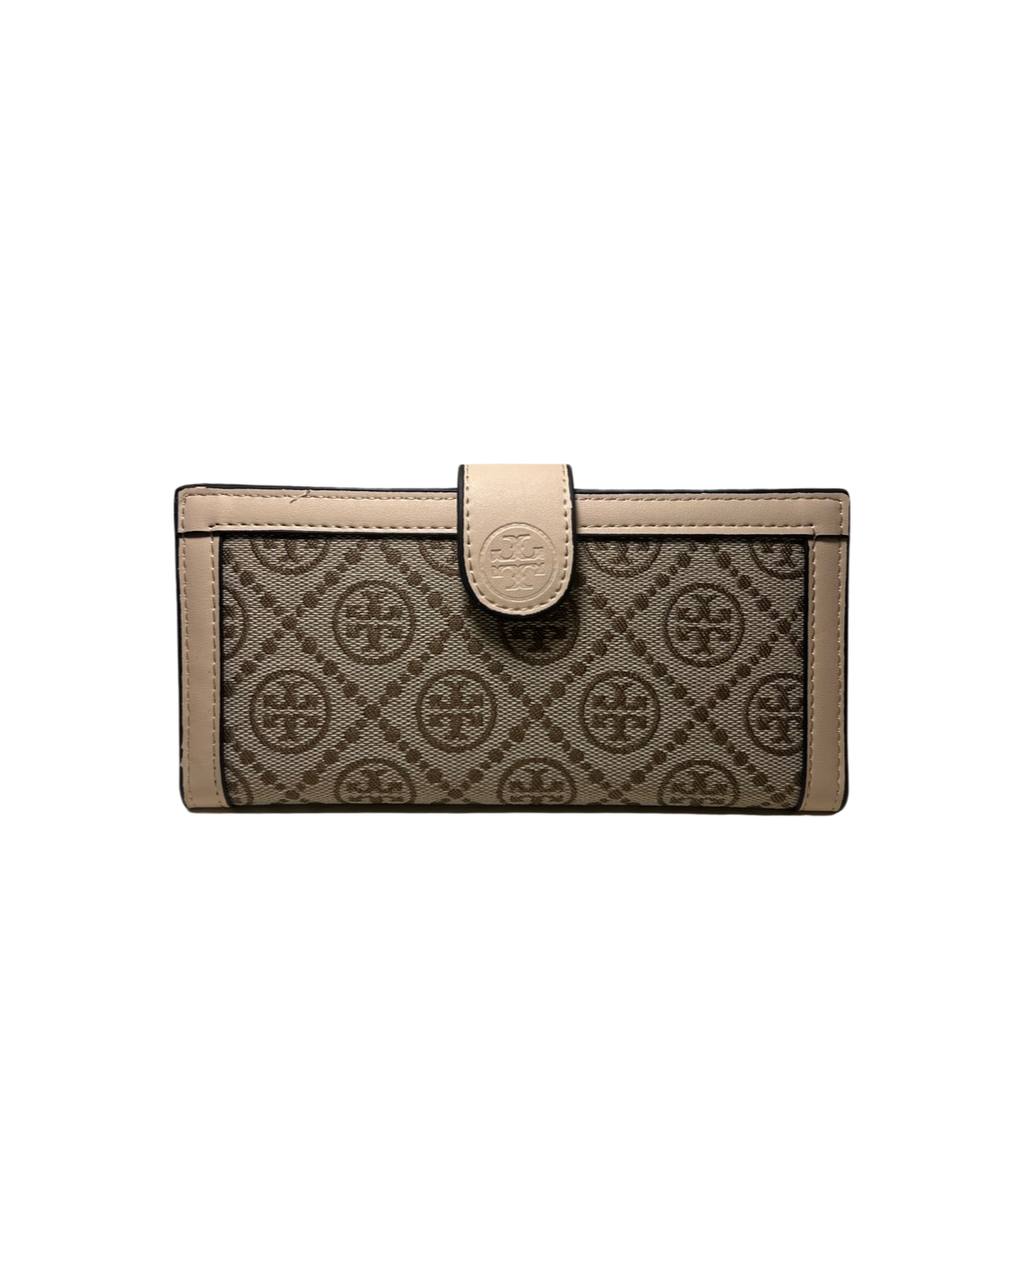 Tory Burch Large Women Wallet - Puzzles Egypt